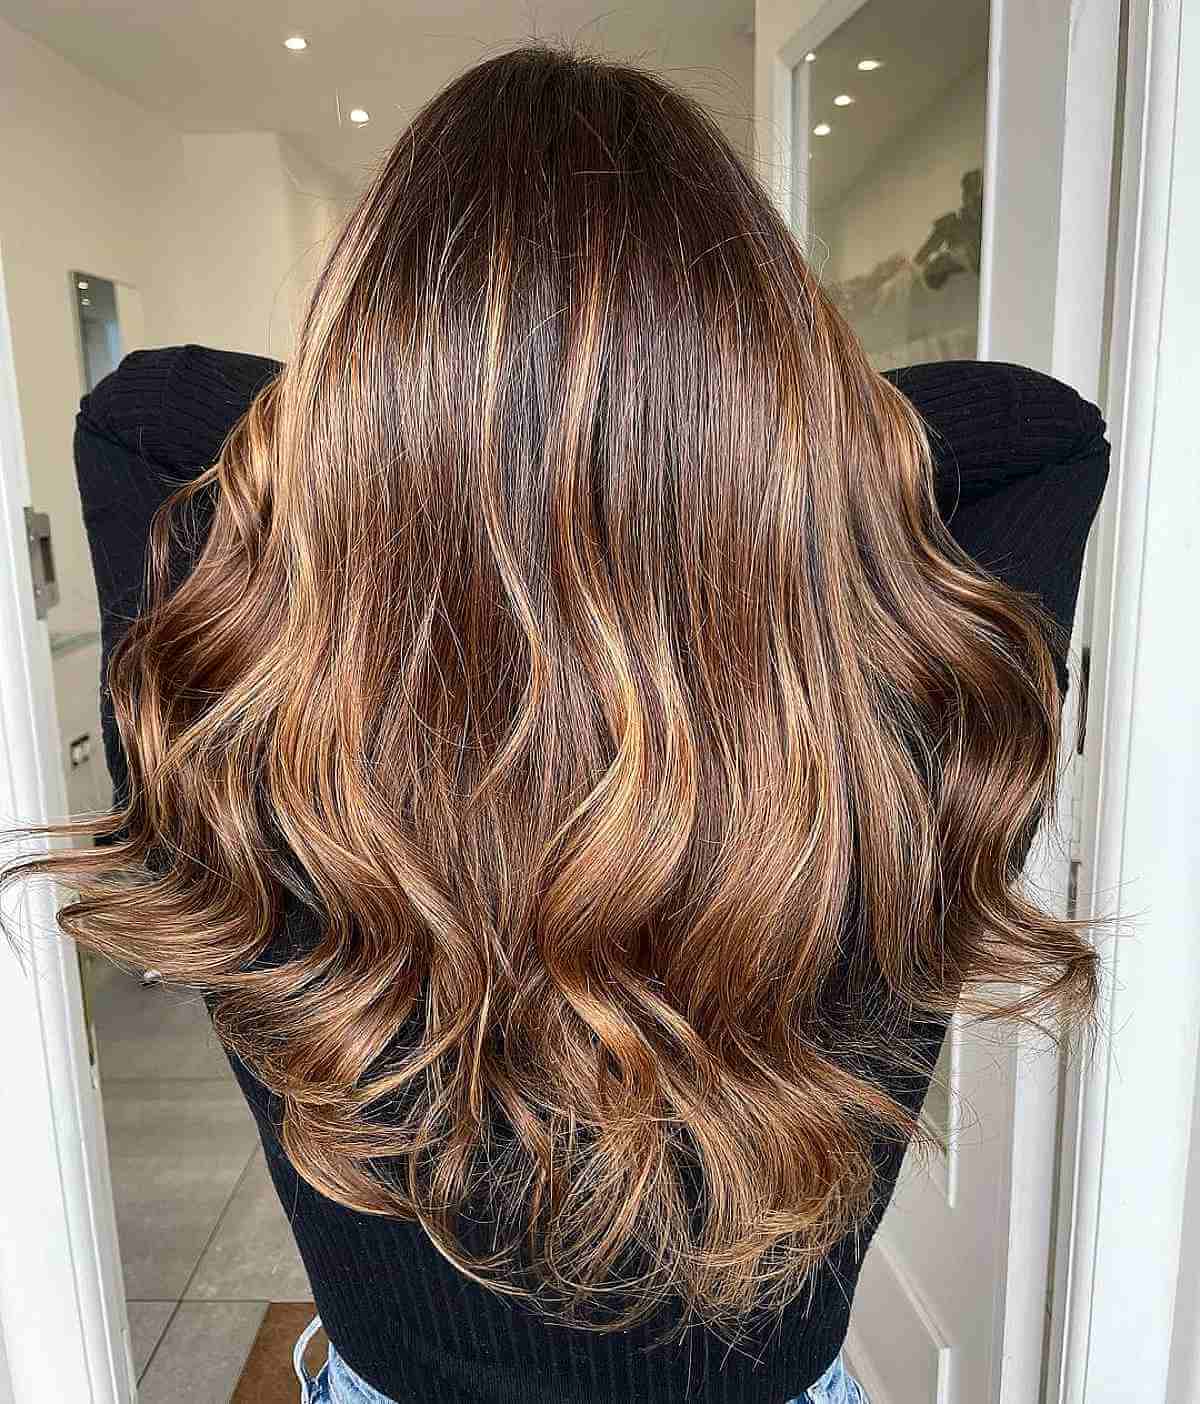 23 Stunning Examples of Summer Hair Highlights To Swoon Over